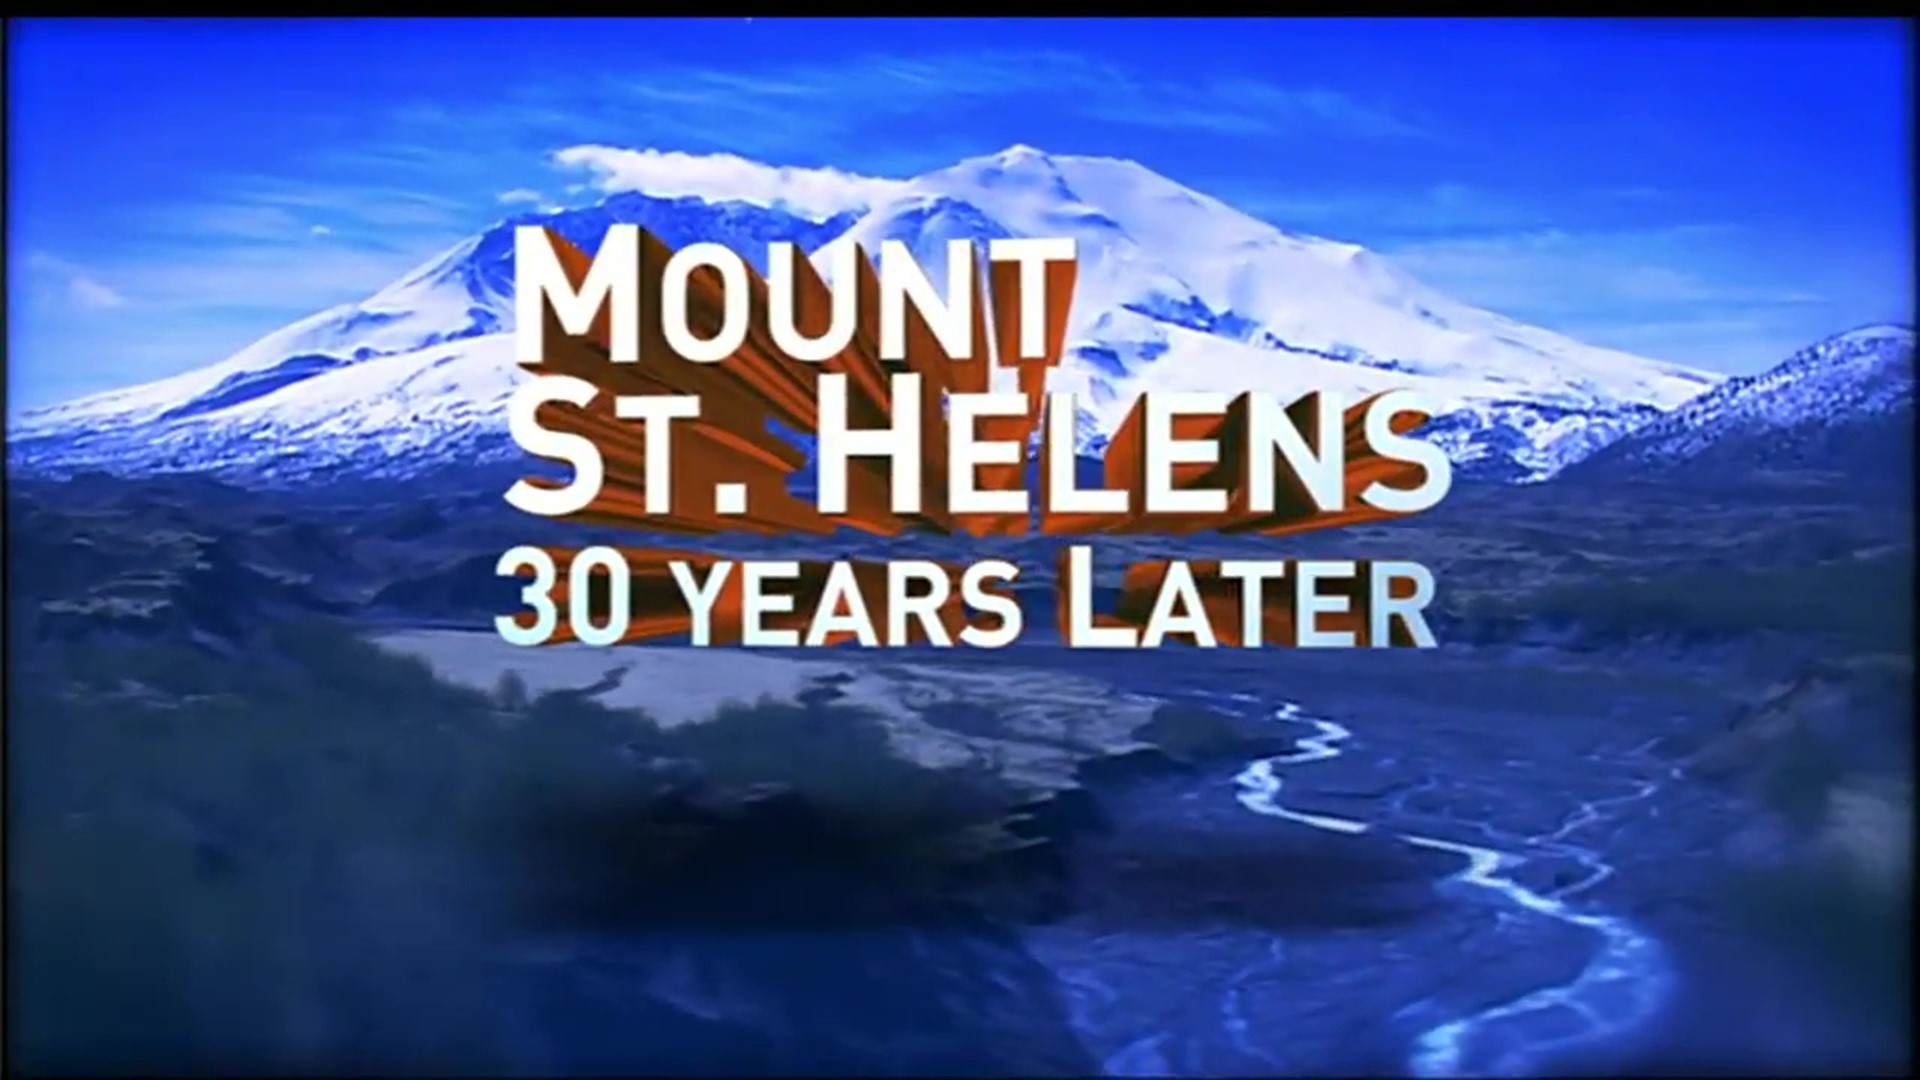 KING 5 remembers the Mount St. Helens eruption 30 years later. (Special originally aired in 2010.)